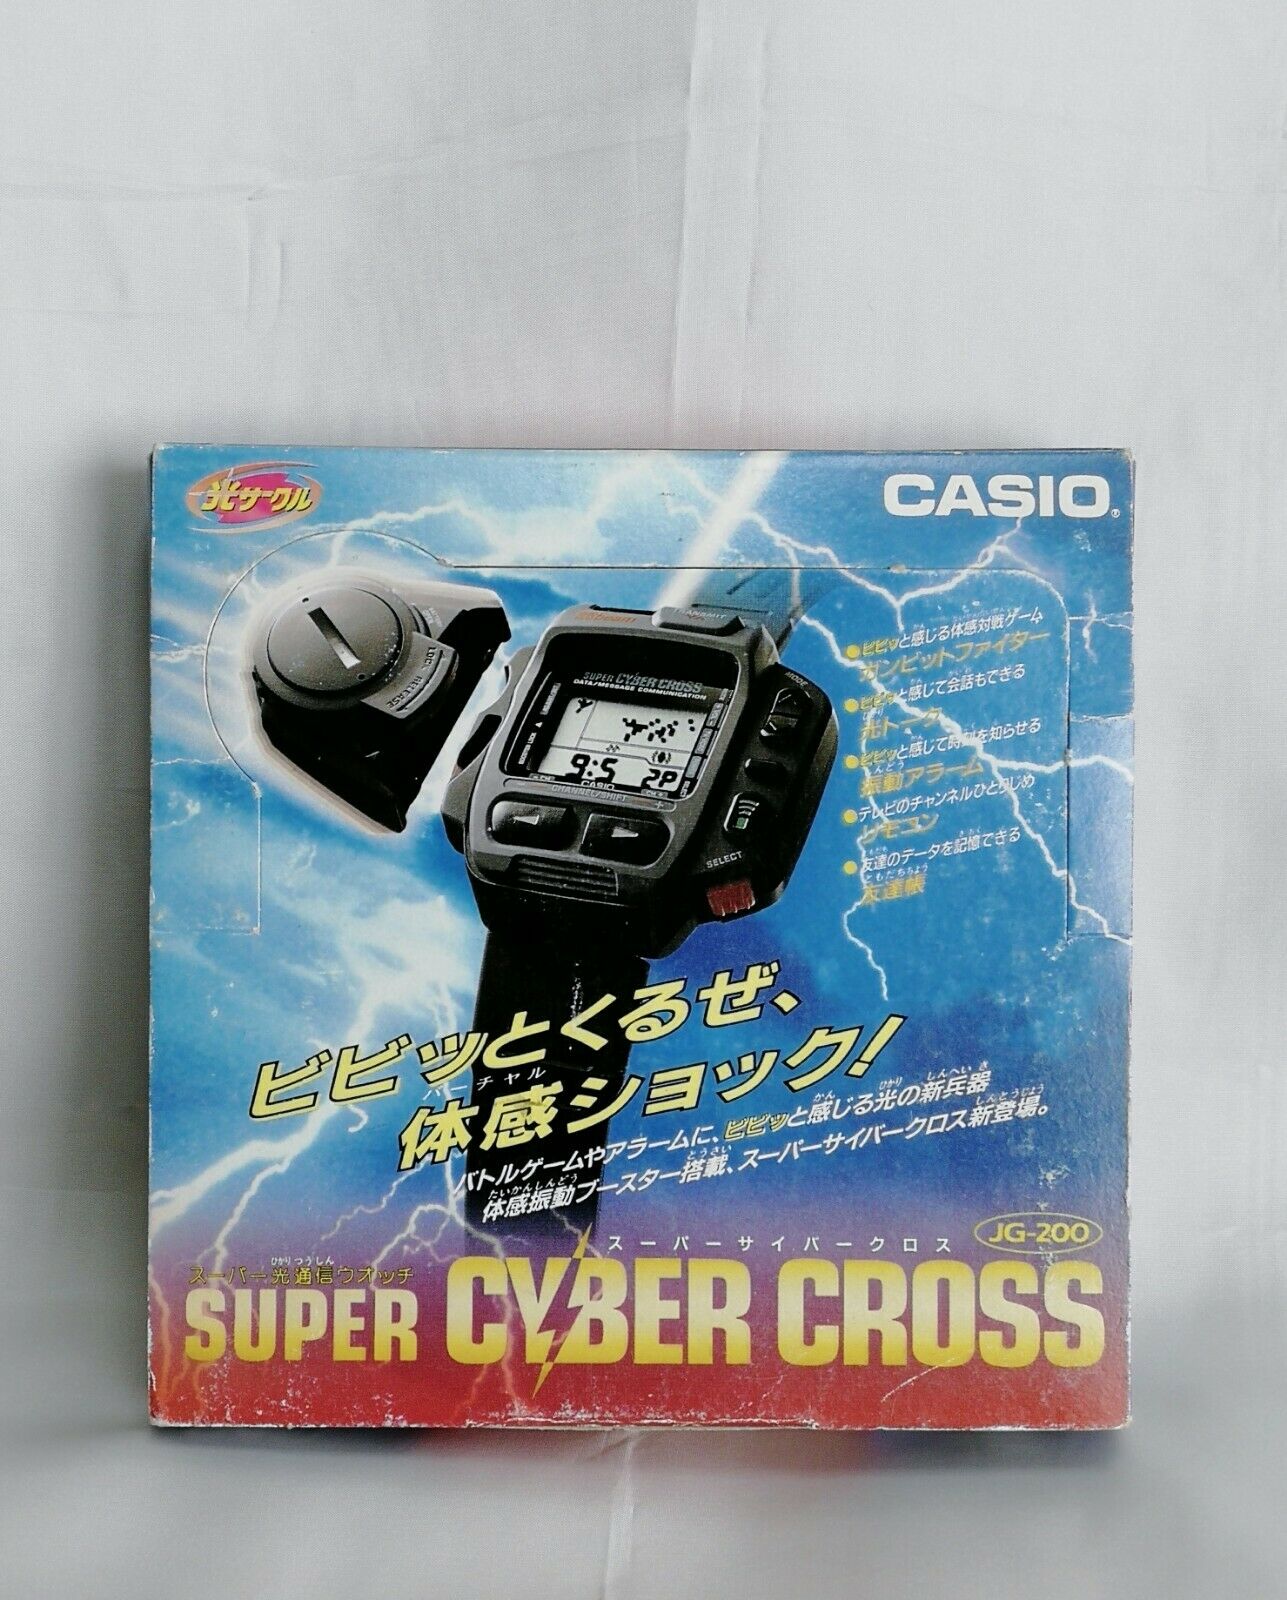 Rare CASIO Vintage JG-200 Super Cyber Cross Game Watch from